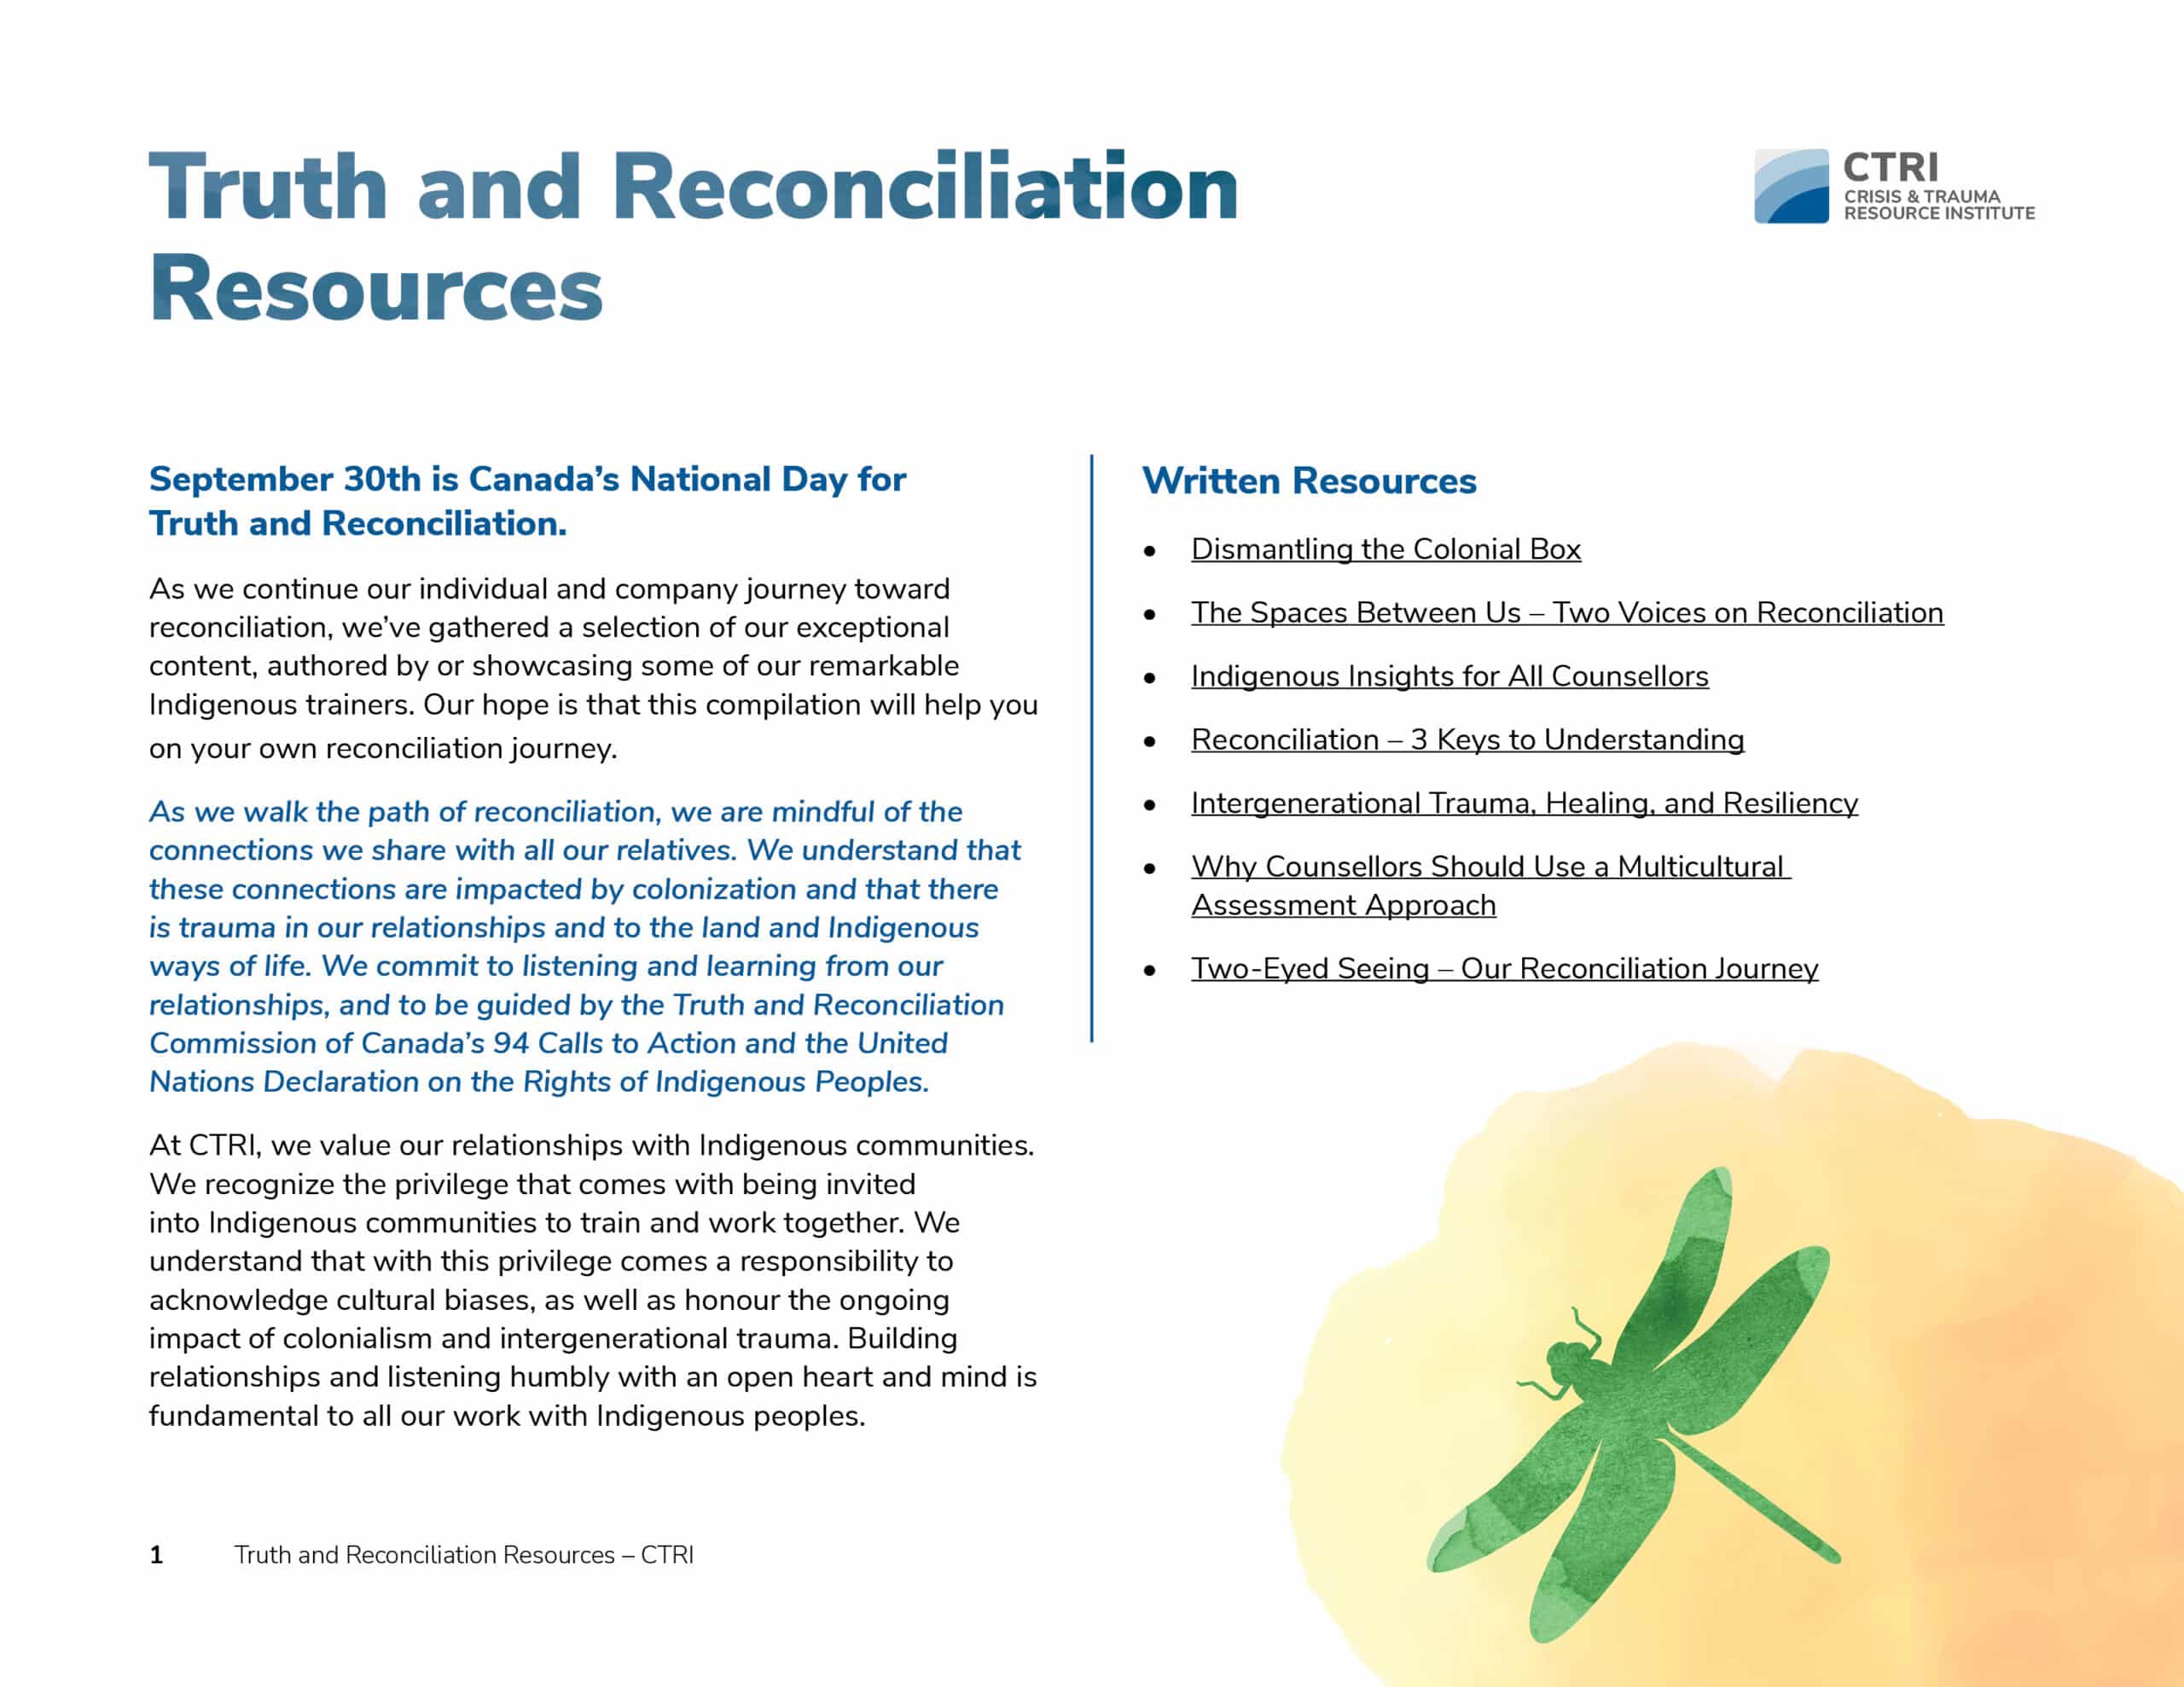 Truth and Reconciliation Resources  Icon